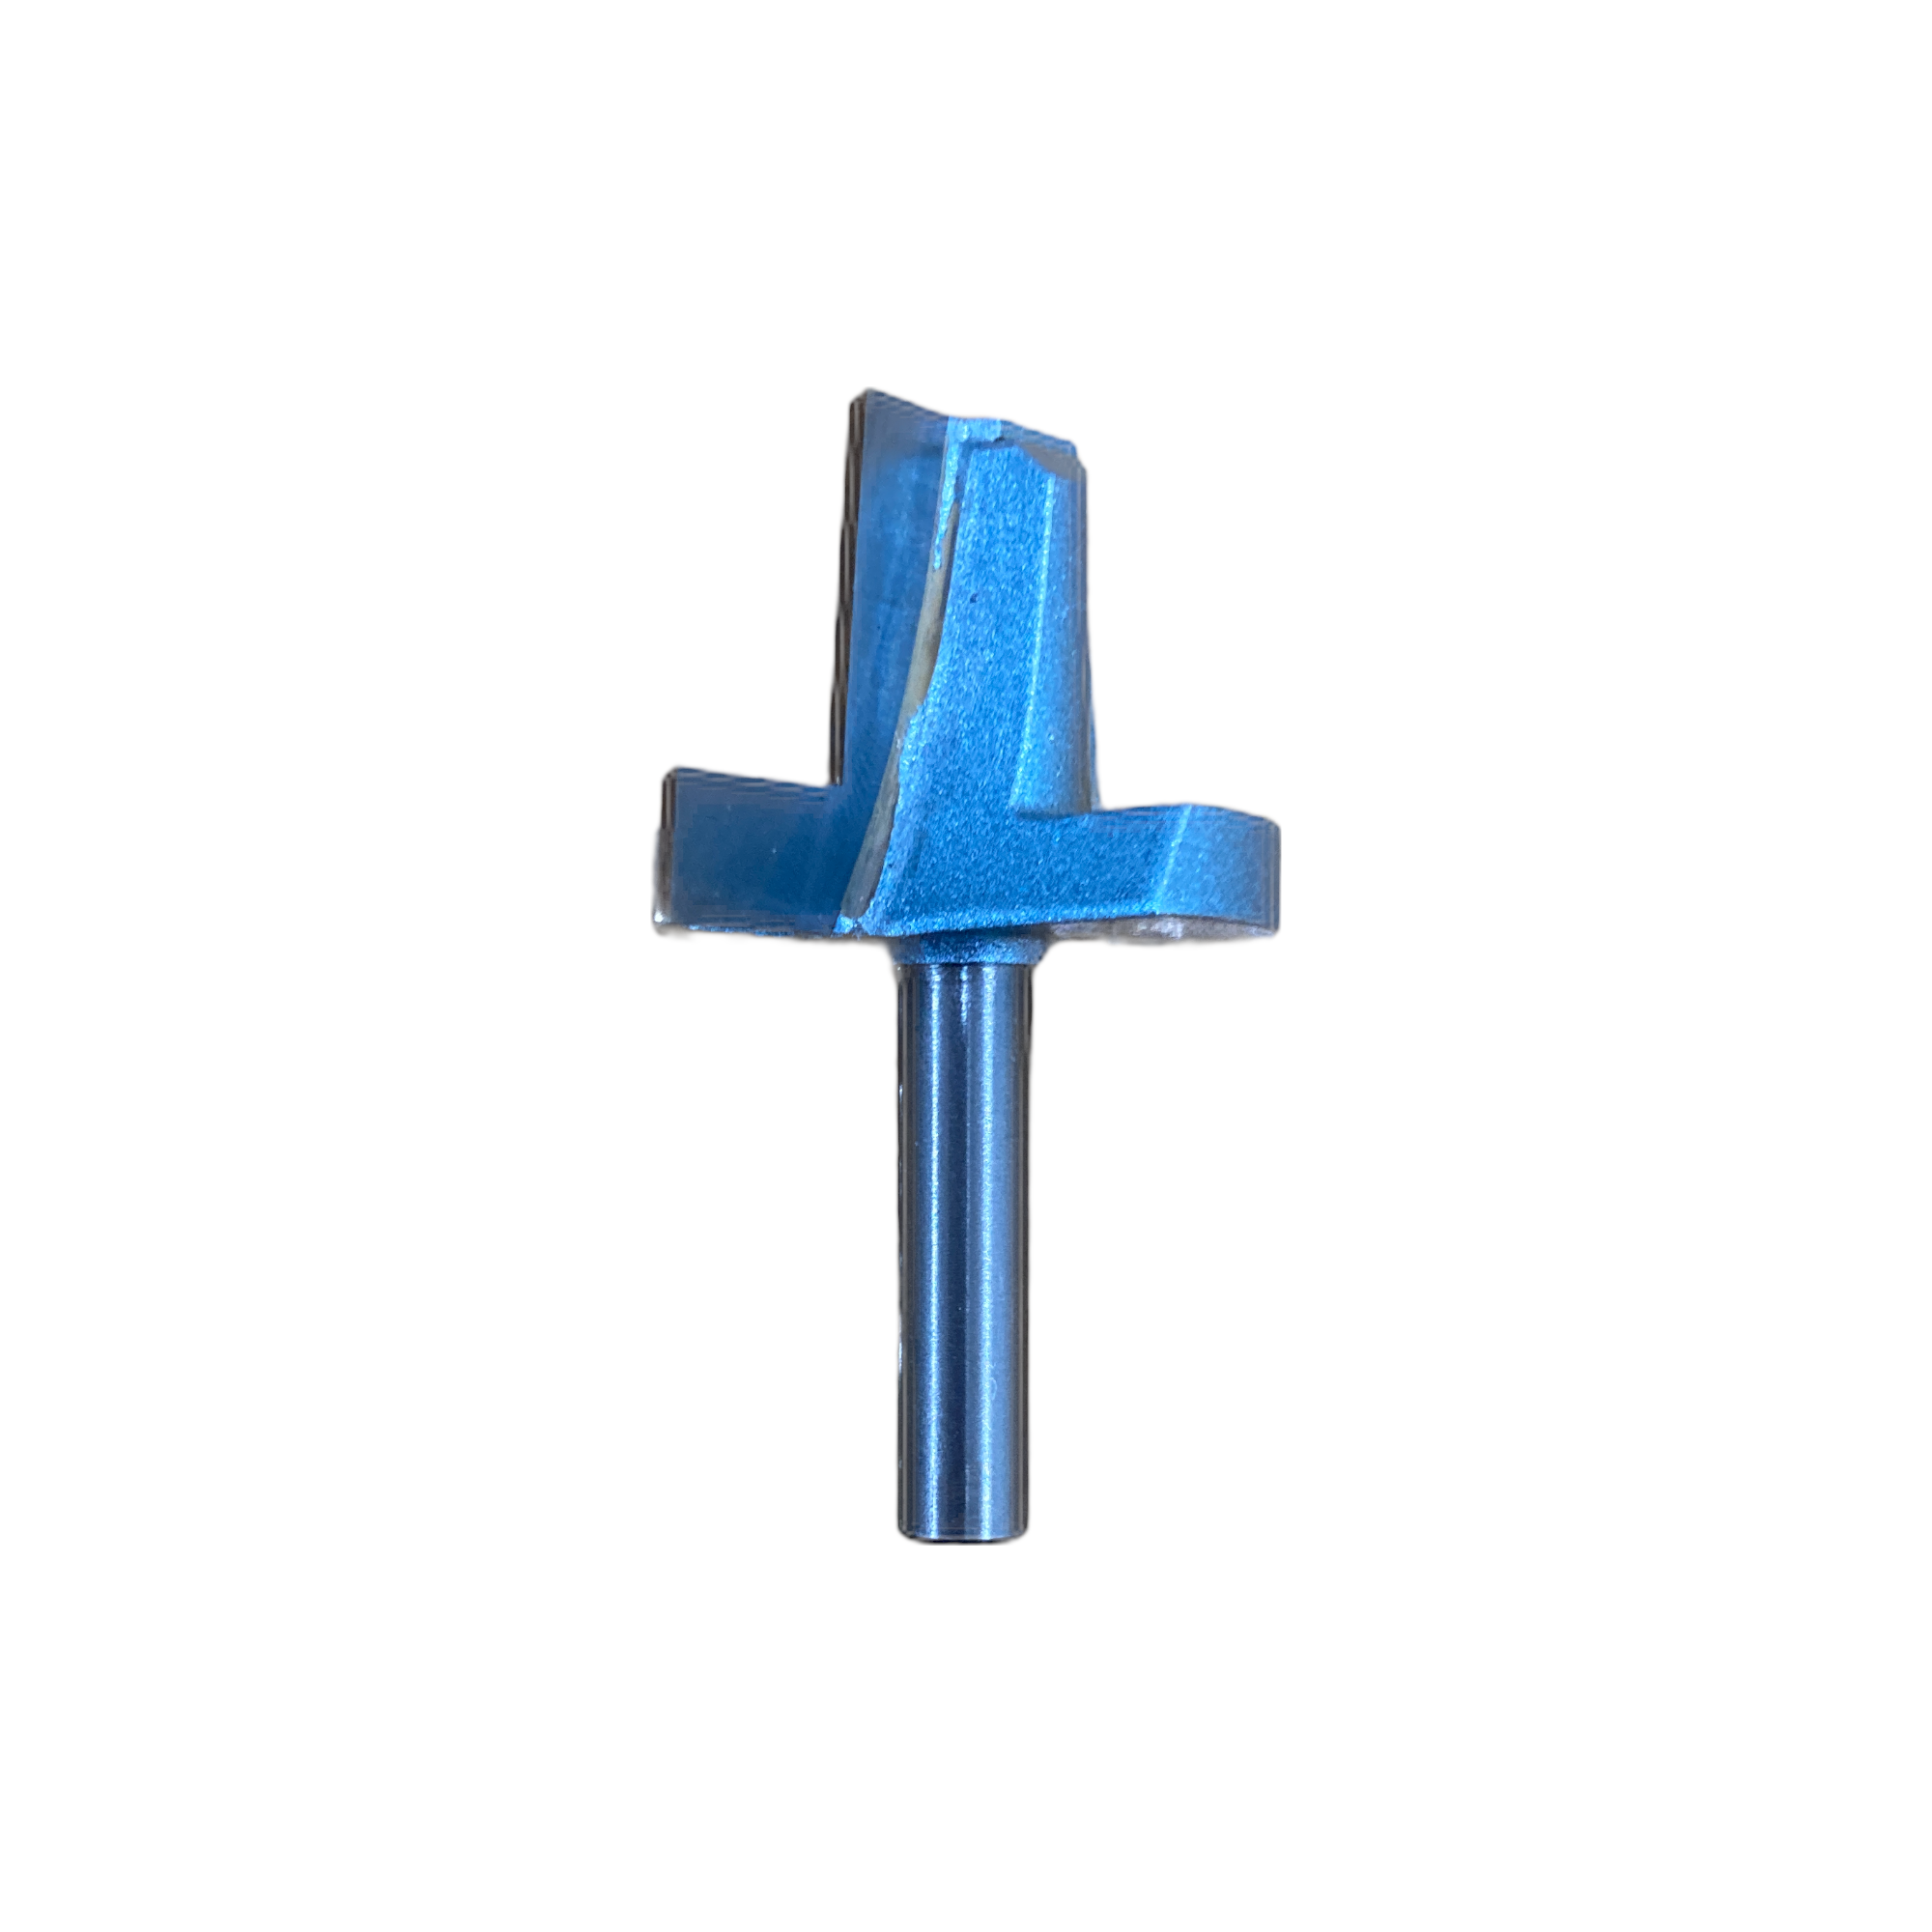 Modii One-pass Cutter Bit size 3/4" (Futures compatible)